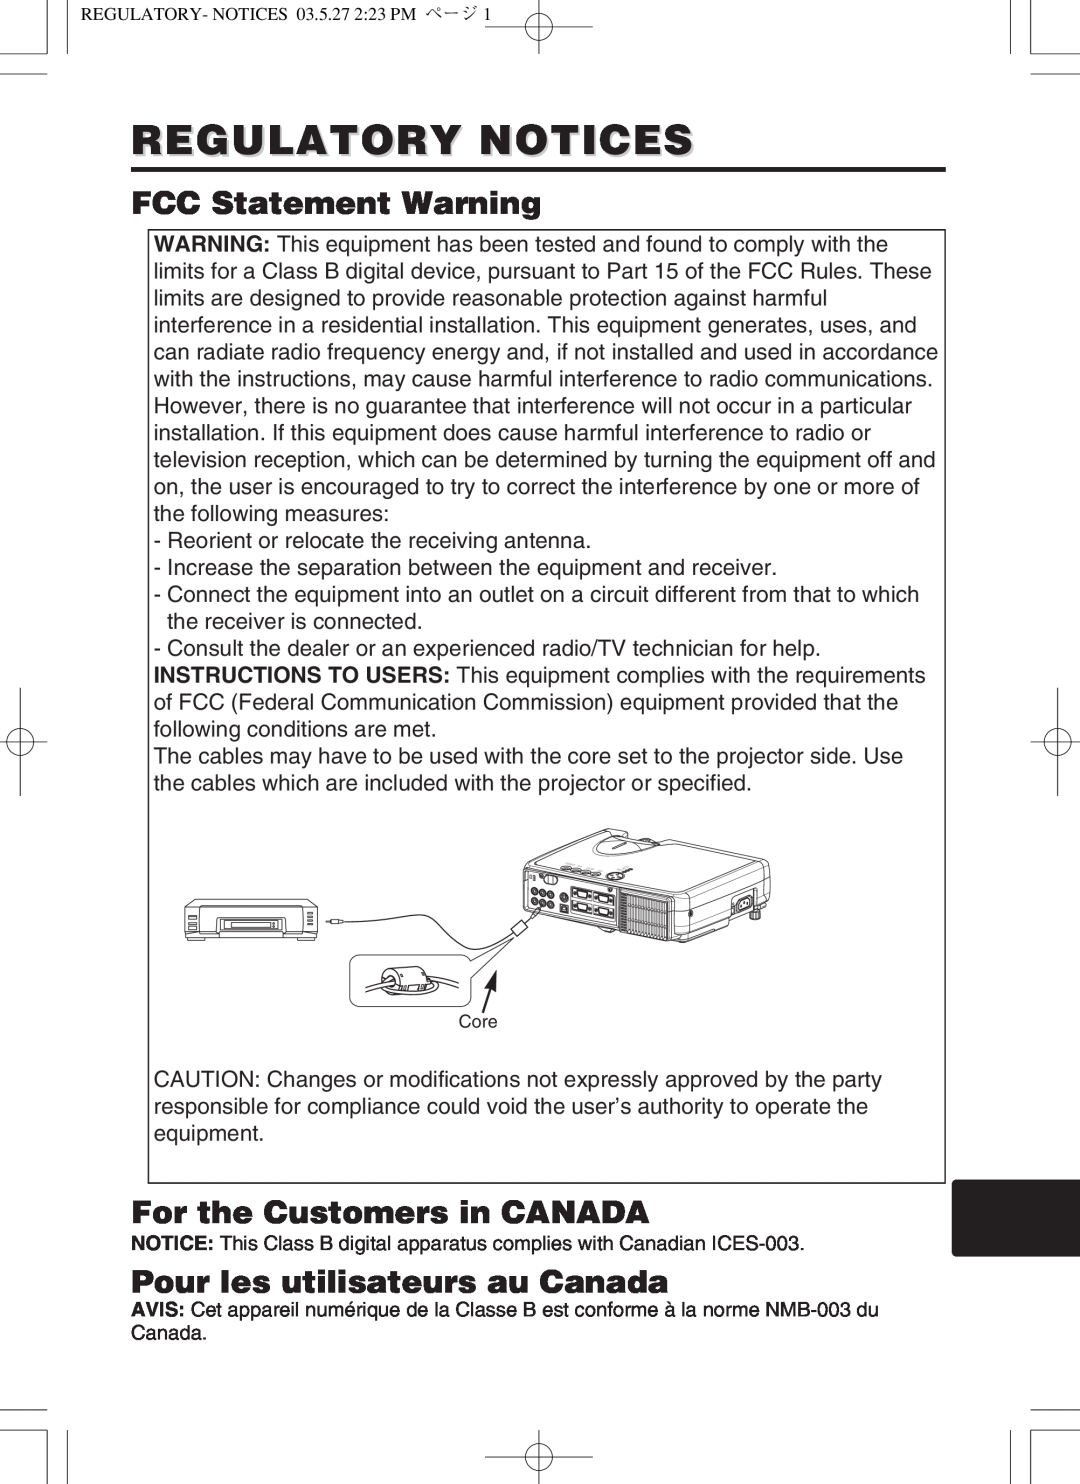 Hitachi cp-s318 Regulatory Notices, FCC Statement Warning, For the Customers in CANADA, Pour les utilisateurs au Canada 